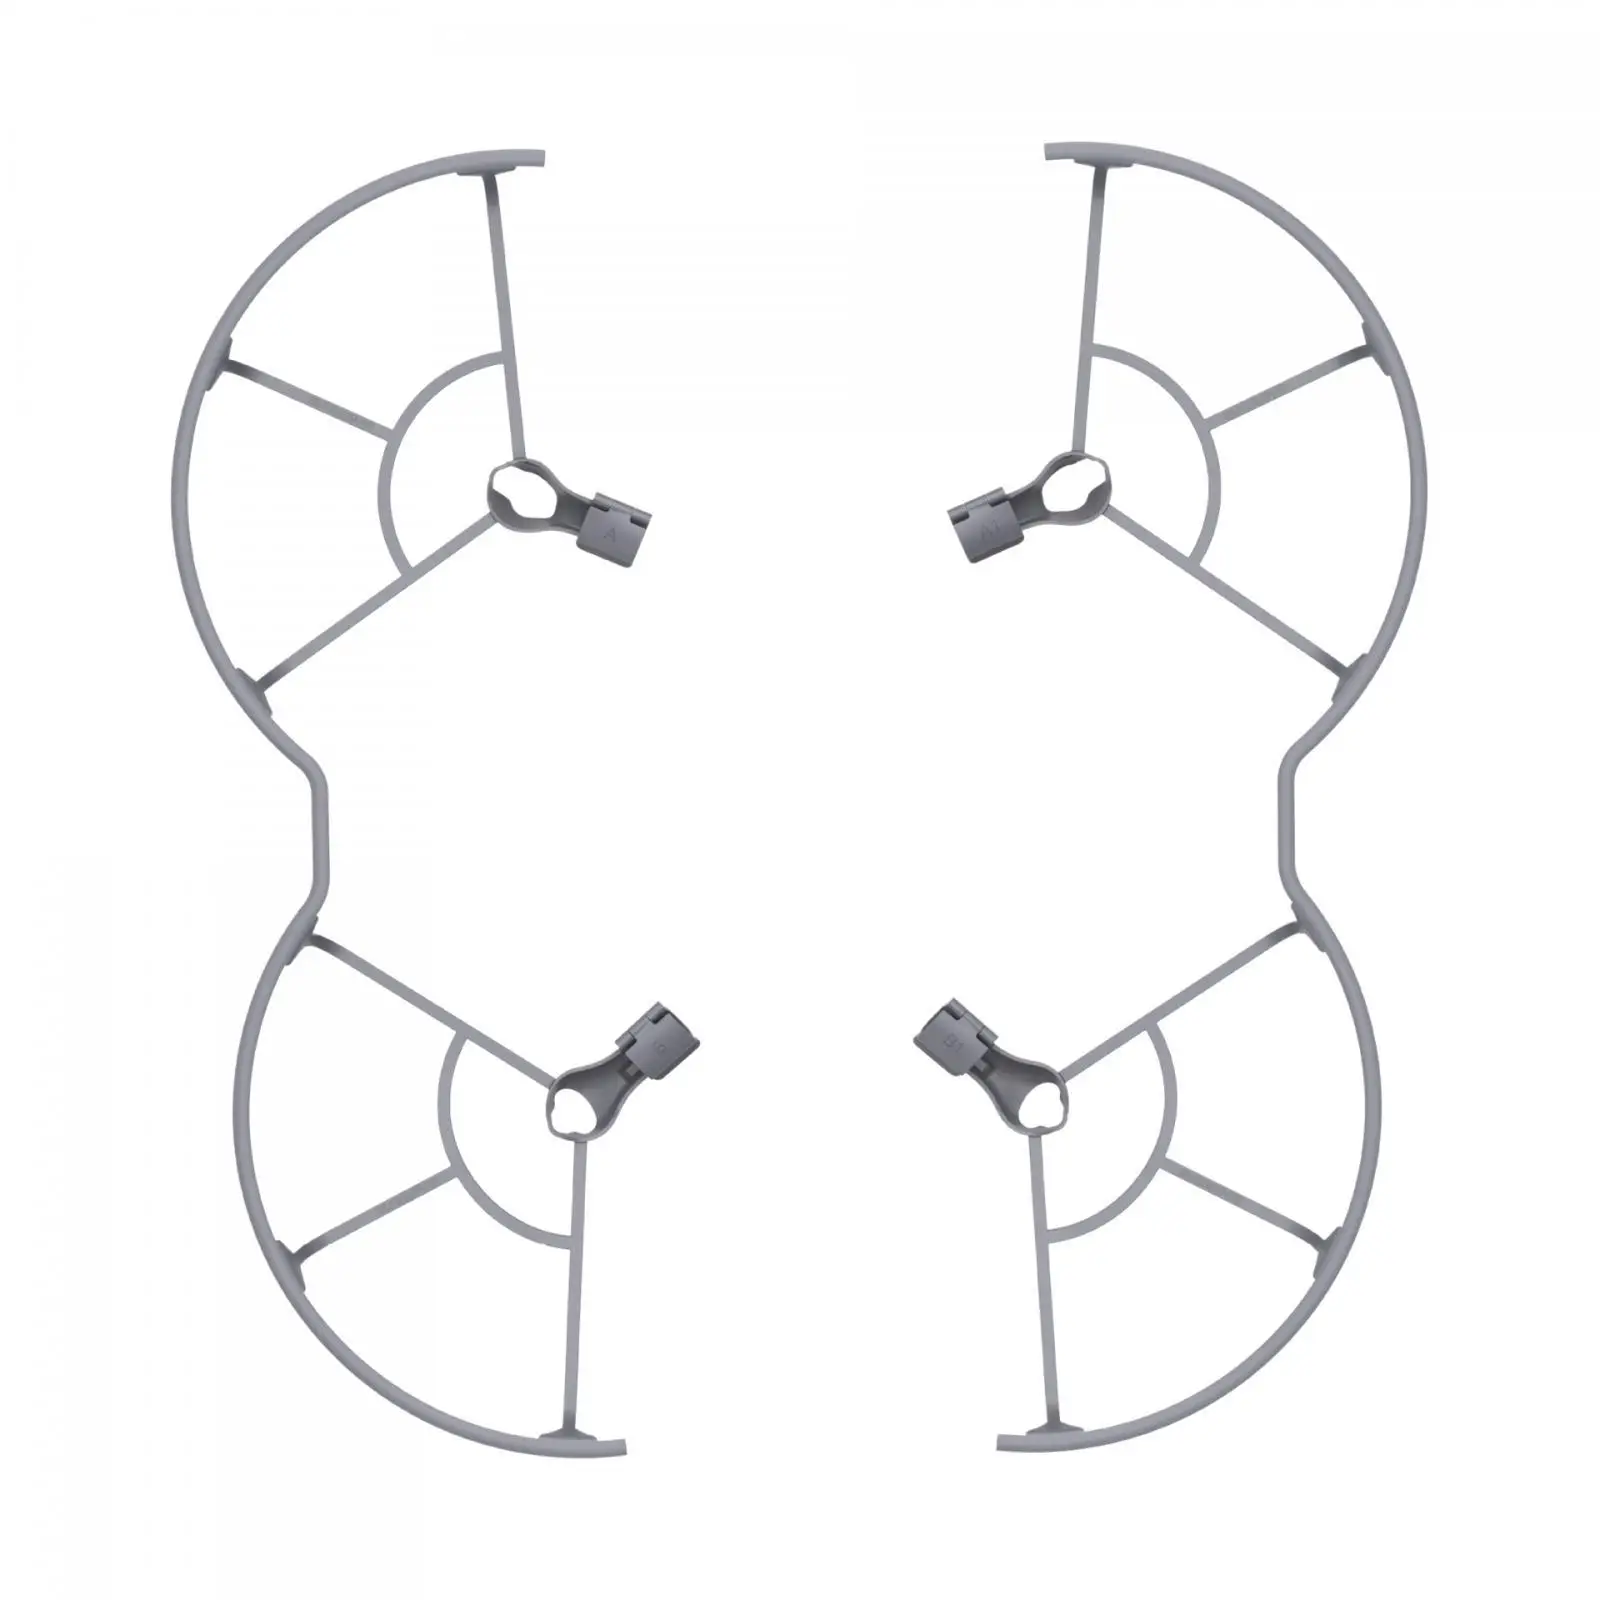 Propeller Guards Protective Hoops Protection Guard Accessory Propellers Protector Protective Cover for Air 3 Drone Accessories